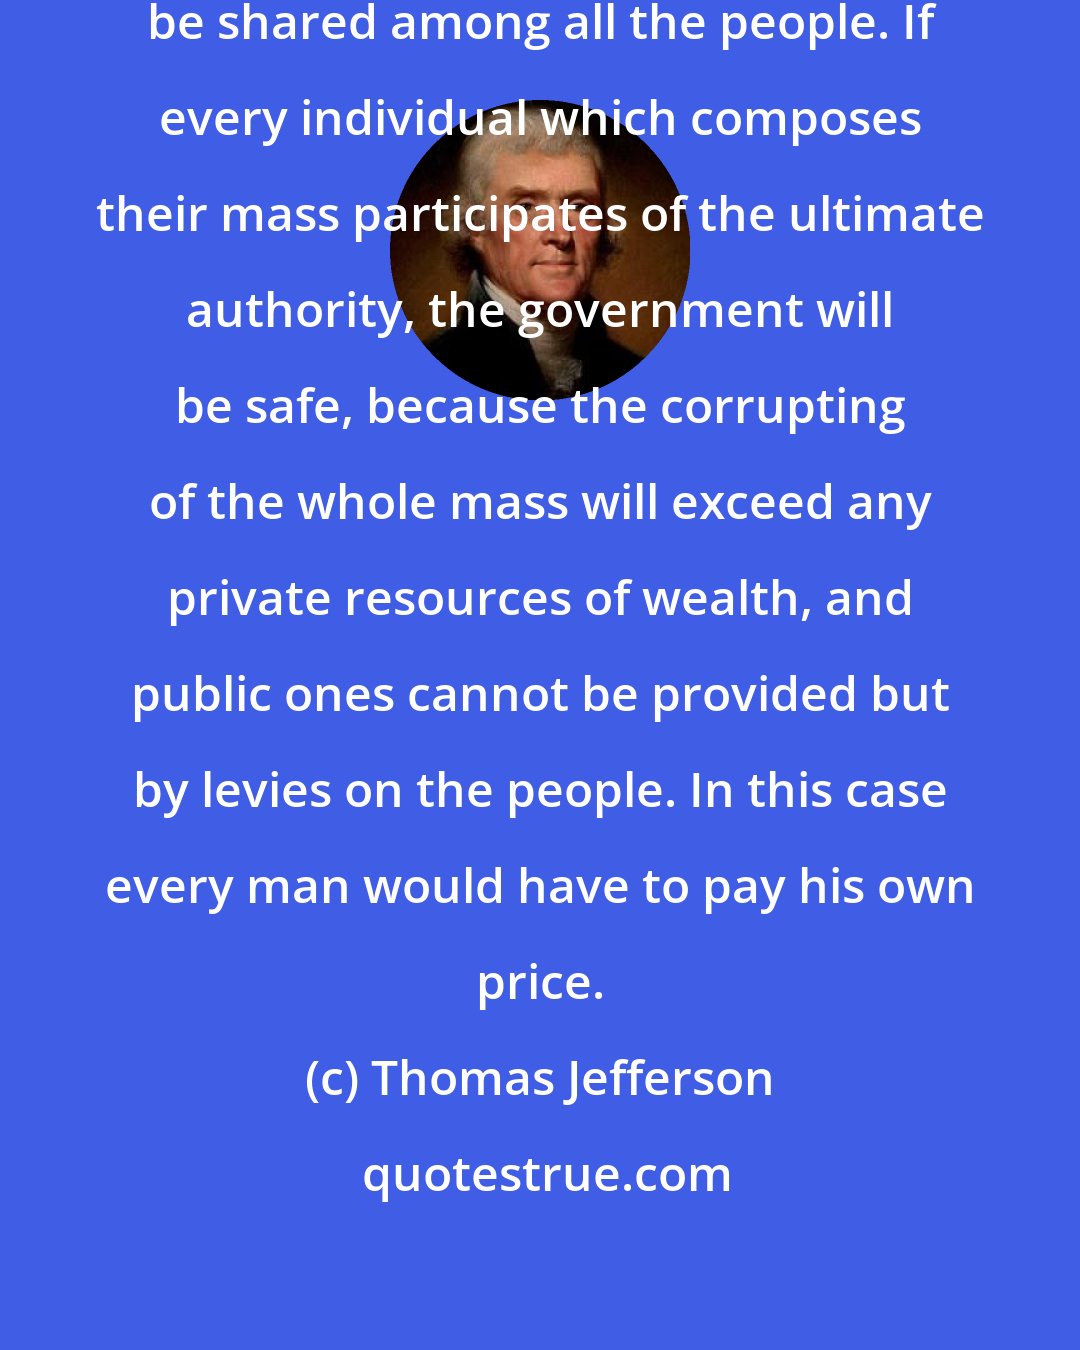 Thomas Jefferson: The influence over government must be shared among all the people. If every individual which composes their mass participates of the ultimate authority, the government will be safe, because the corrupting of the whole mass will exceed any private resources of wealth, and public ones cannot be provided but by levies on the people. In this case every man would have to pay his own price.